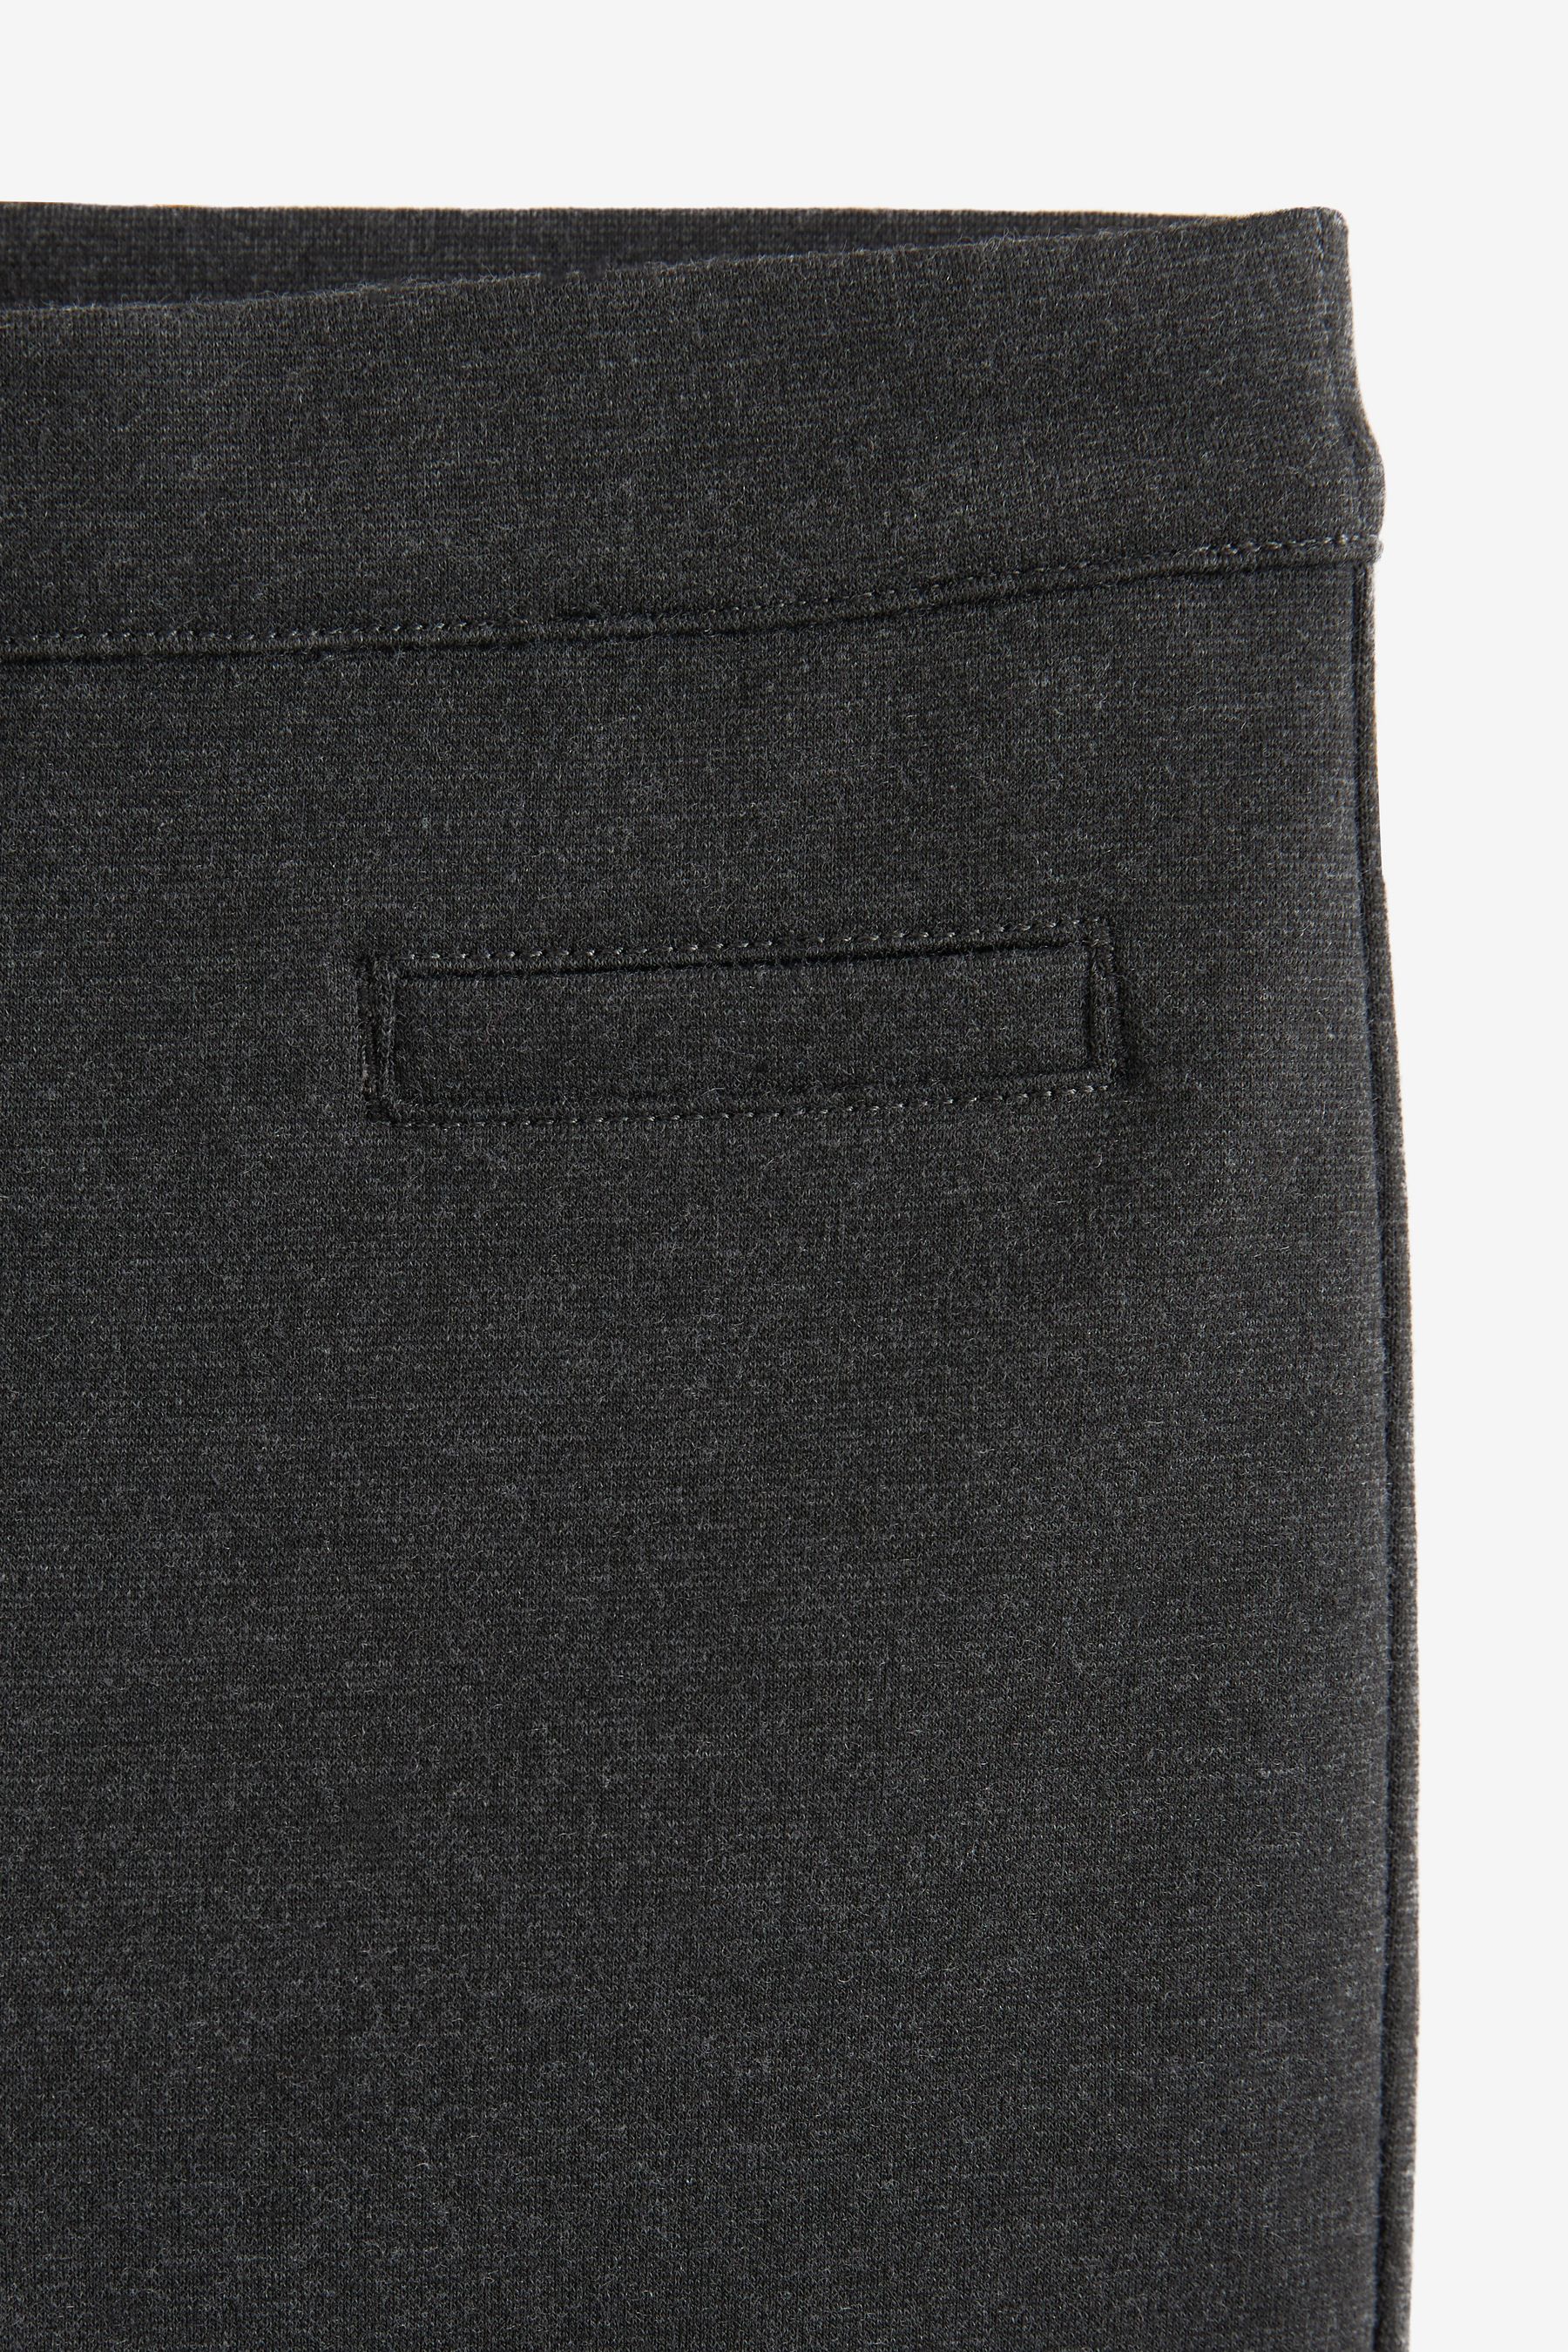 Buy Jersey Stretch Pull-On Skinny School Trousers (3-17yrs) from the ...